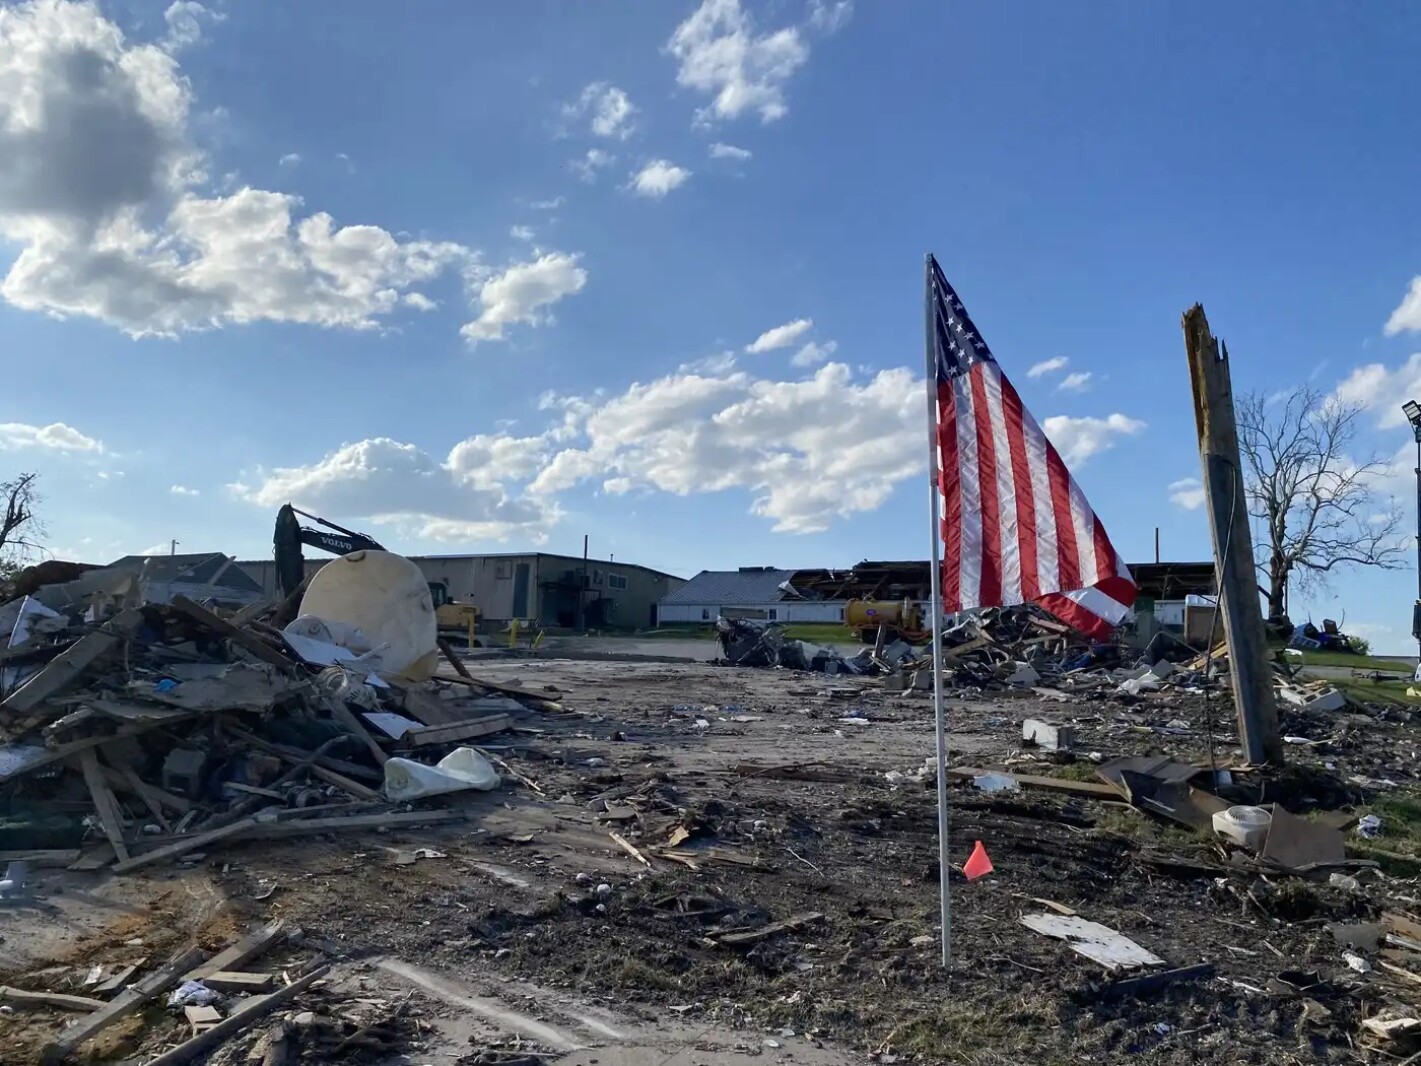  ‘Something we’ve never seen before’: Minnesota emergency experts aid Iowans hit by tornadoes 